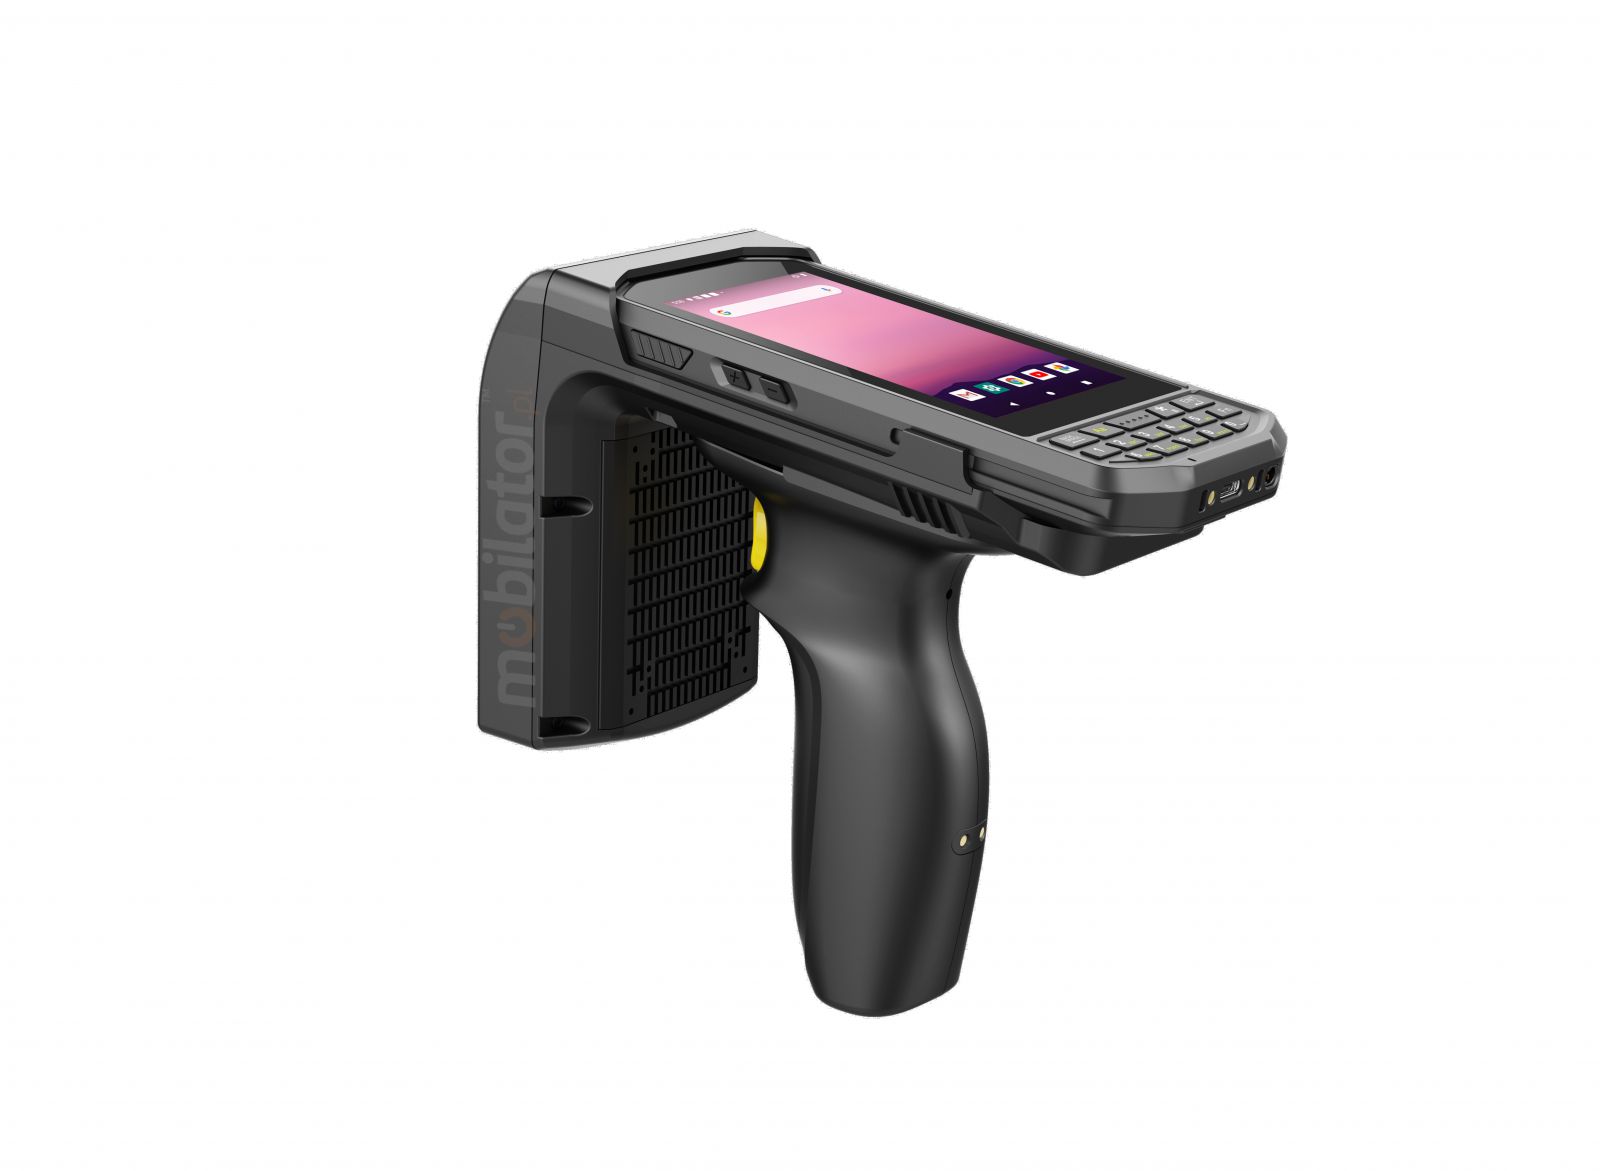 Mobipad Qxtron 4100 v.3 - Industrial (IP65 + MIL-STD-810G) data terminal with UHF and 2D Zebra 2100 code scanner, 4GB RAM and 64GB disk. 